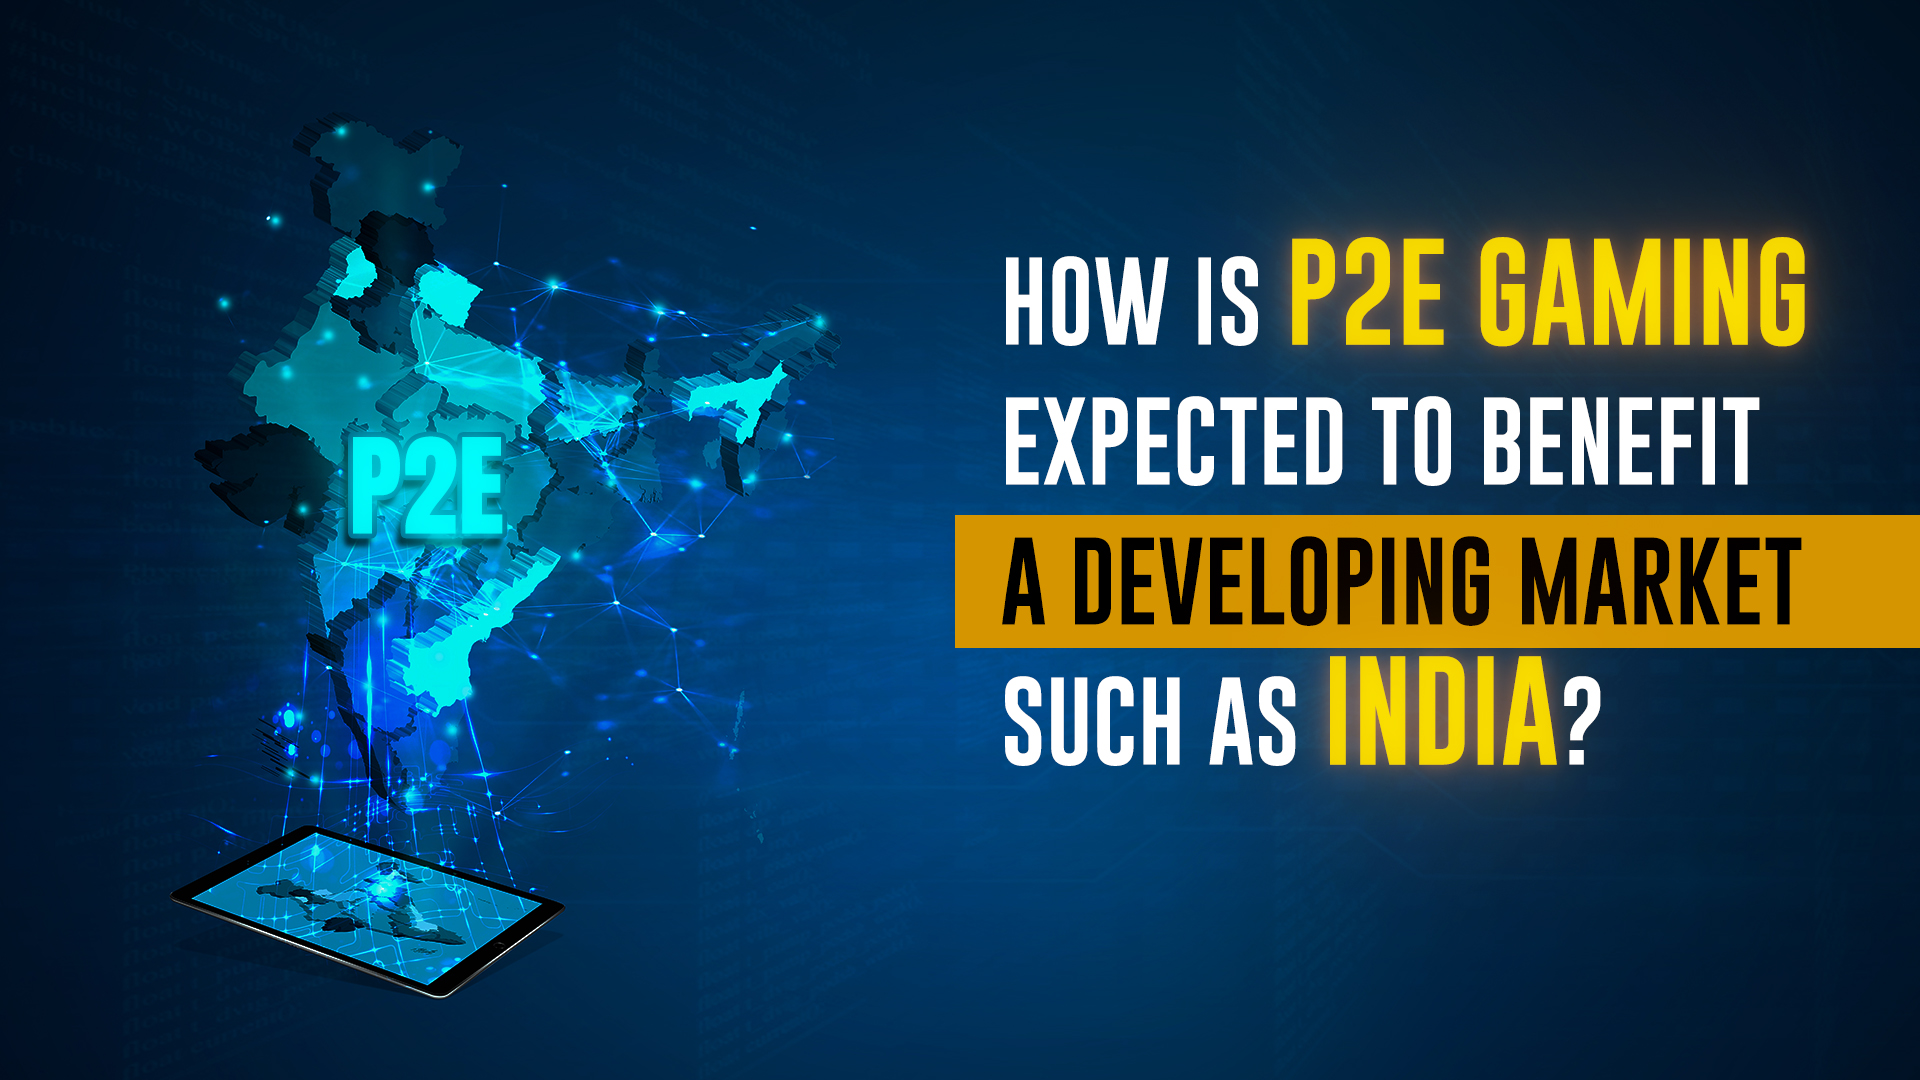 How Is P2E Gaming Expected To Benefit A Developing Market Such As India?